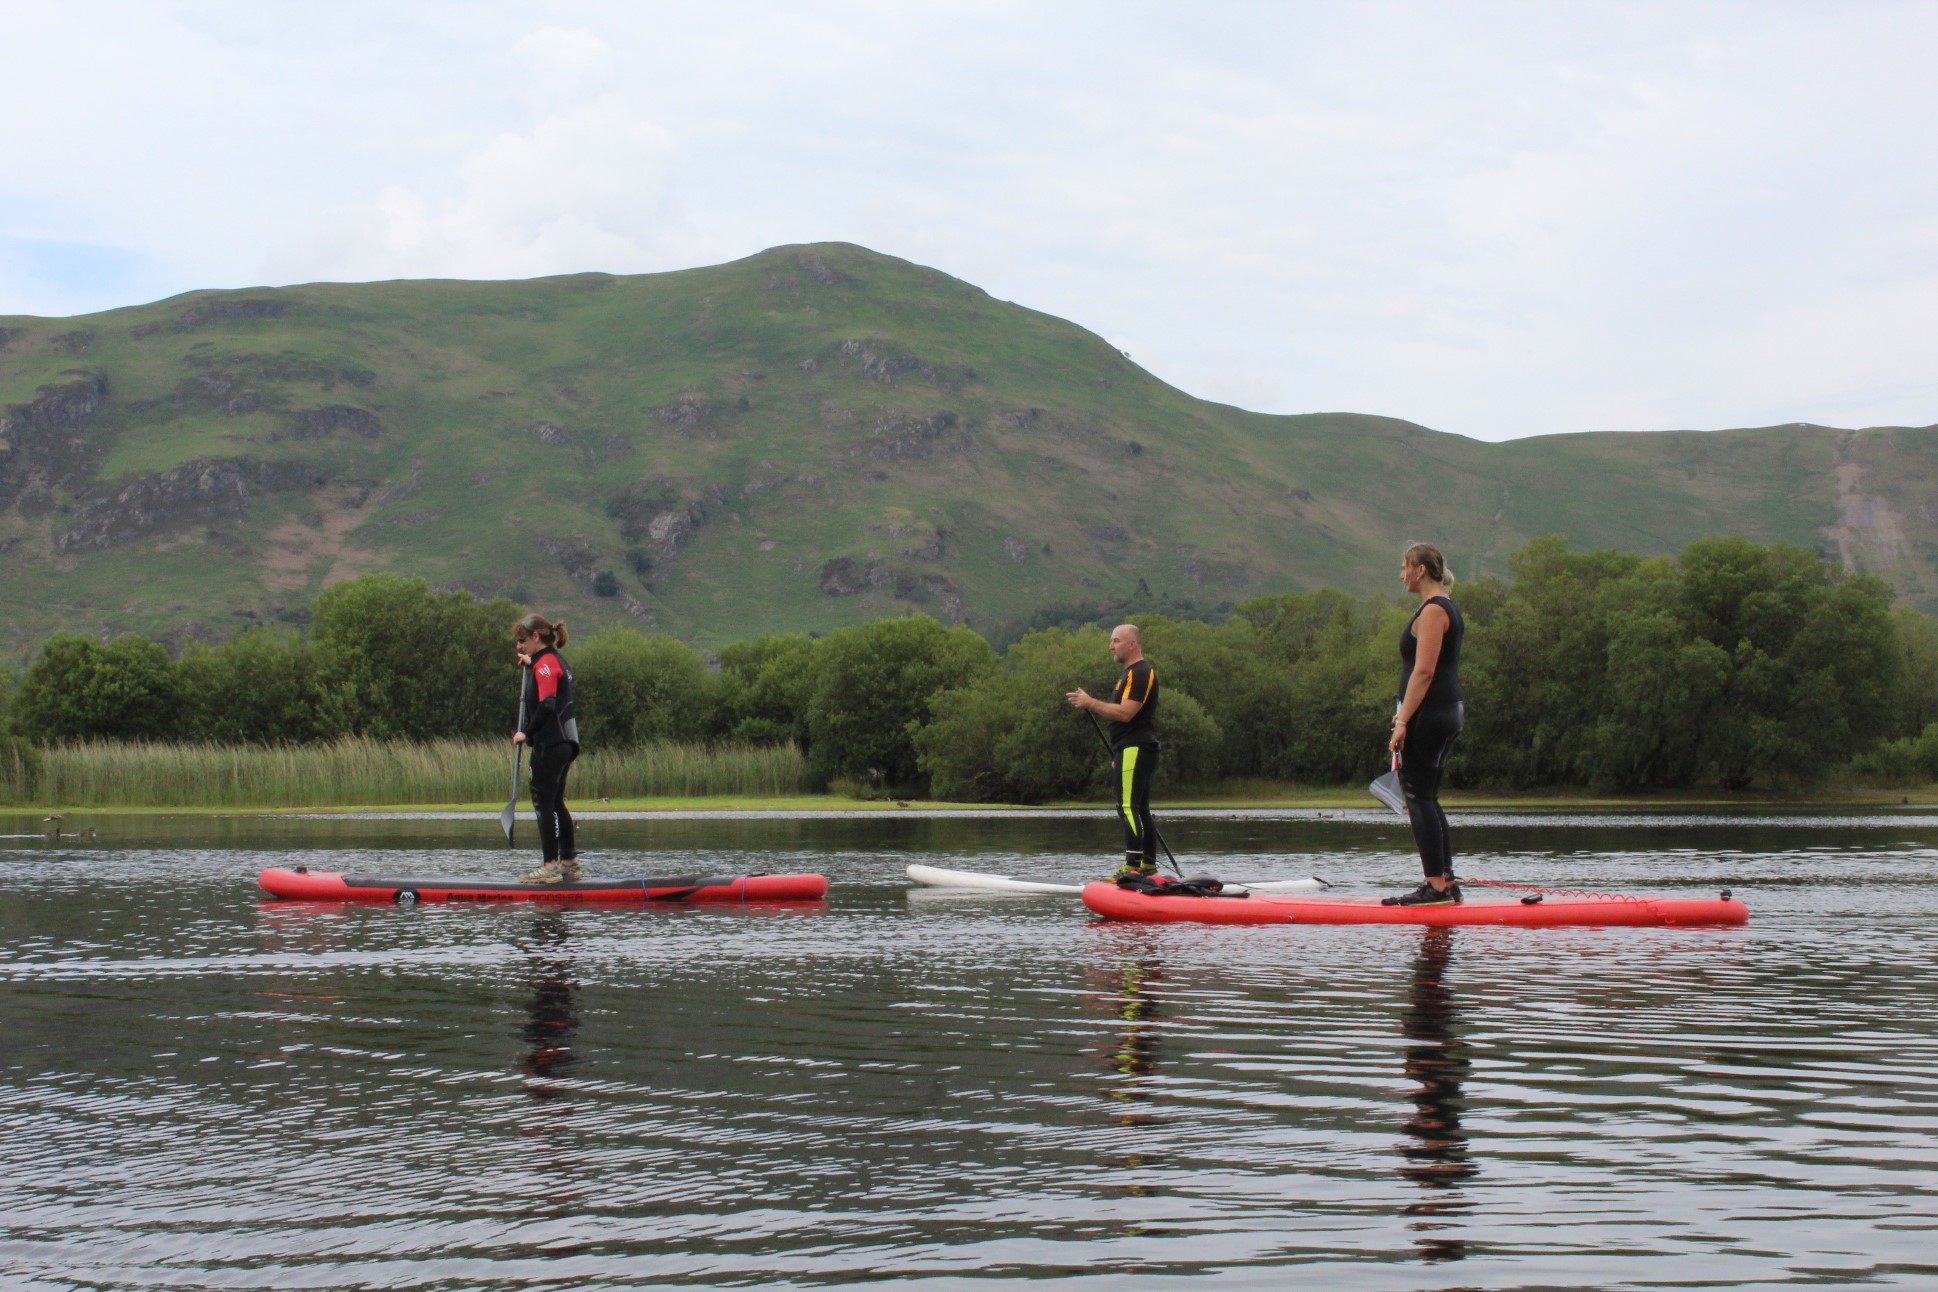 Paddle boarding on Derwentwater in the Lake District